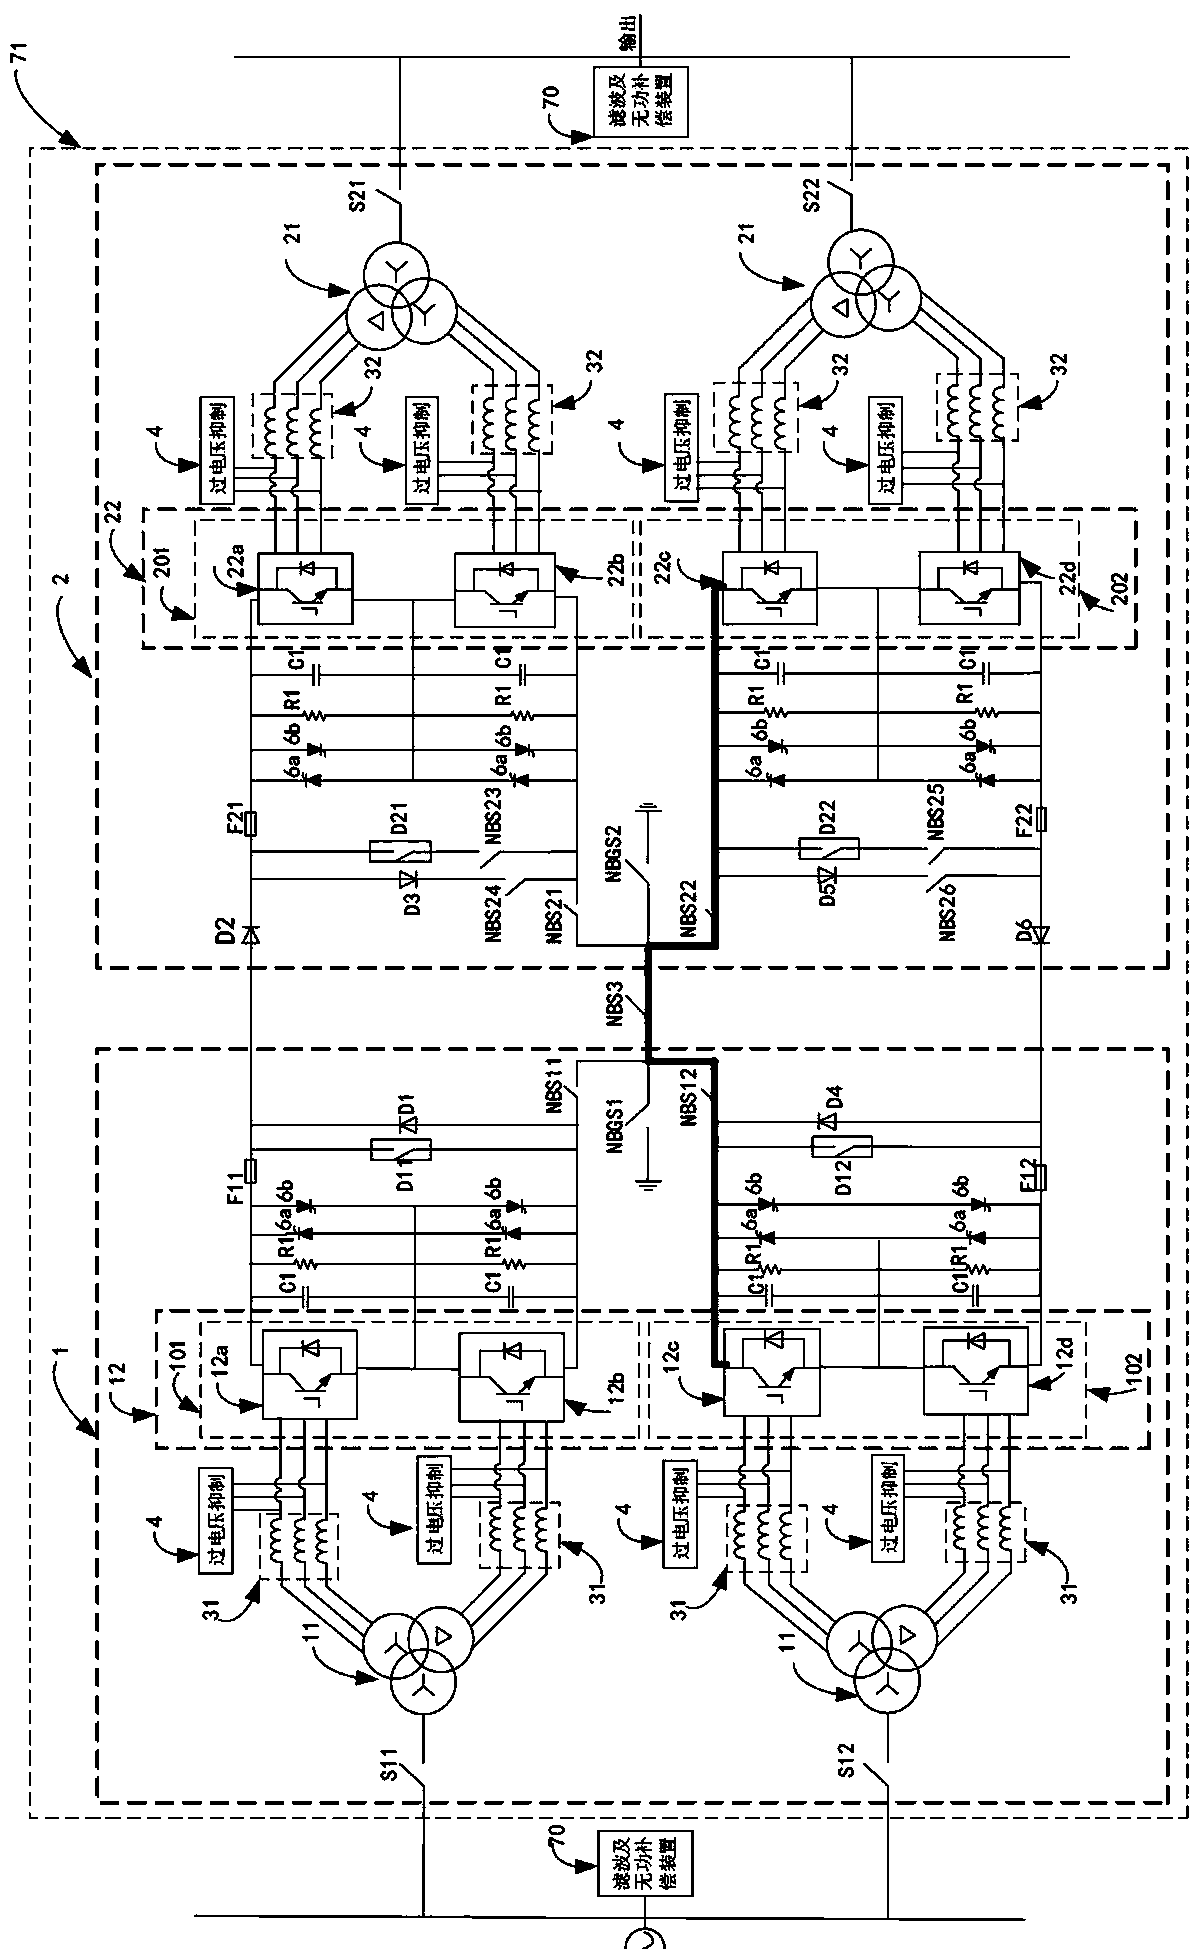 Current conversion device for ship shore power system